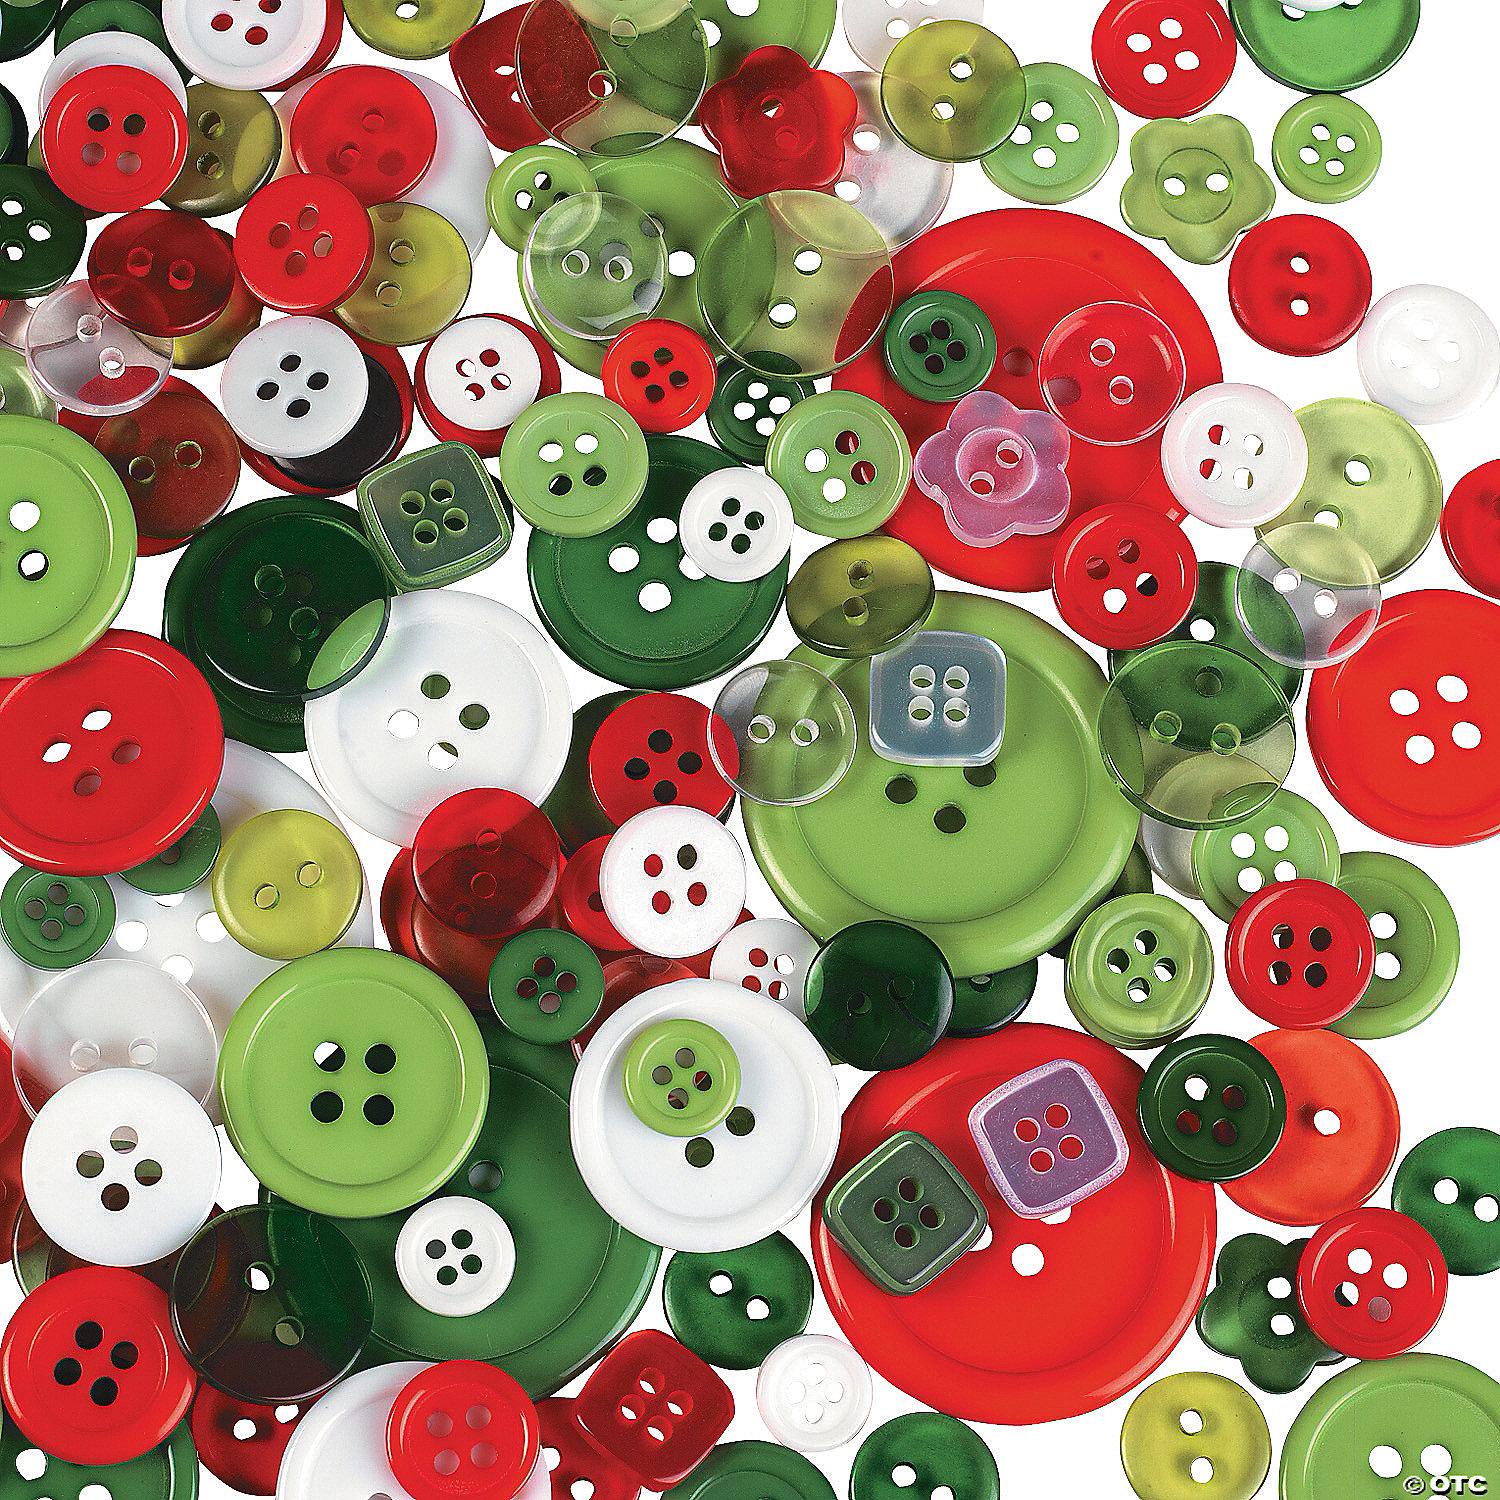 150 Assorted Sewing & Craft Buttons USA Button Company High Quality Many Matches 